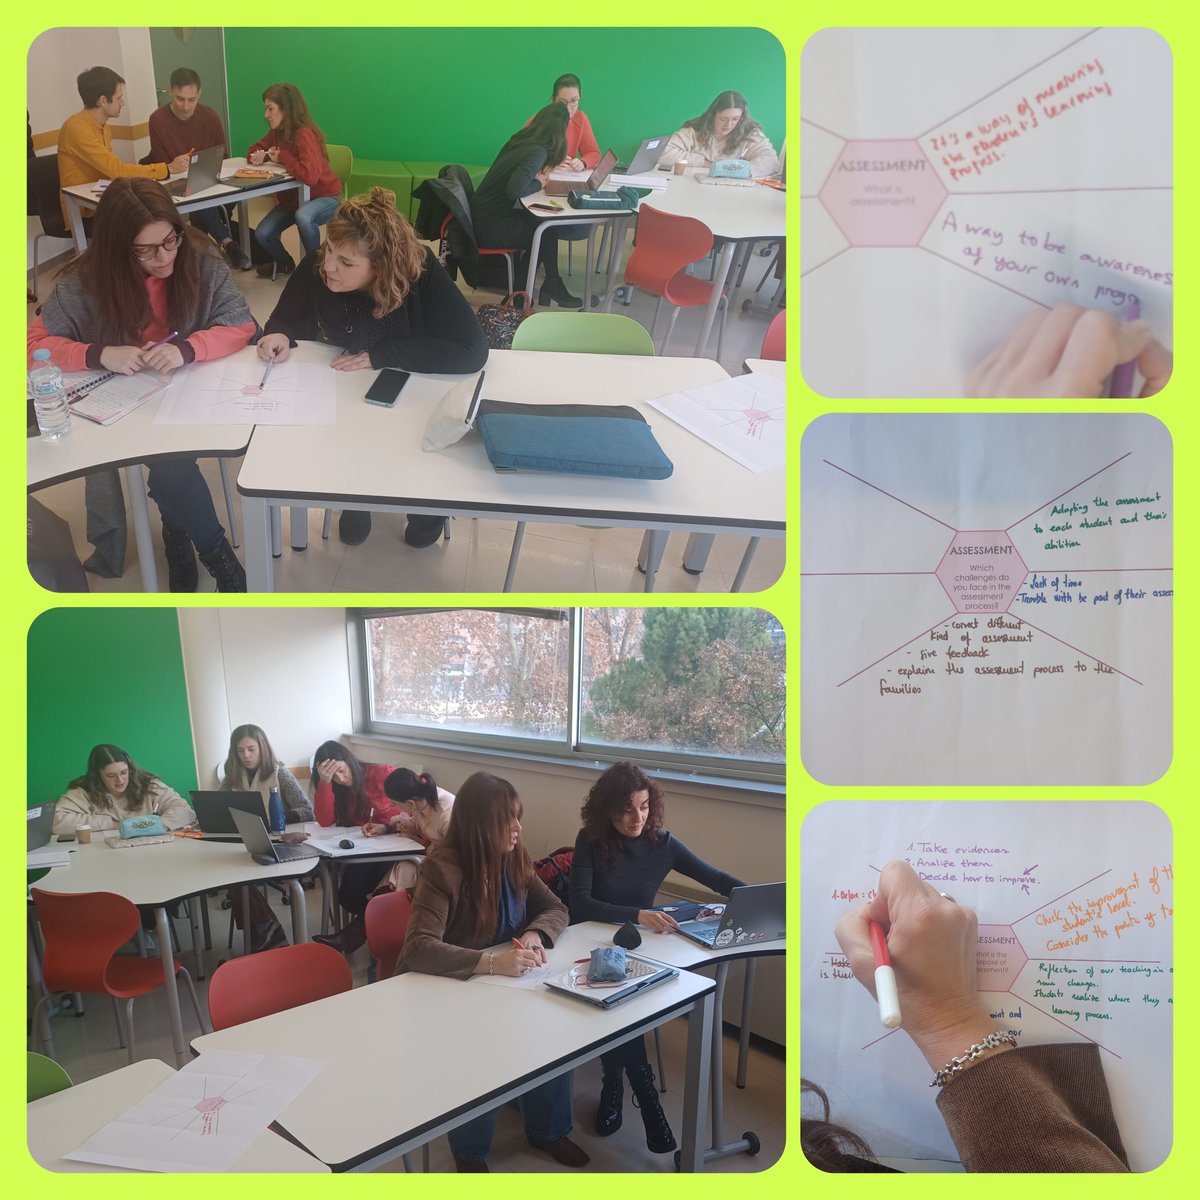 GEP 1 LLE-APA territories 7th session. Such an outstanding team that are outdoing themselves with #CLIL essentials required to keep getting better and better as the course draws on. Today, dealing with what assessment involves. @InnovacioSLEO @fle_sleo @EsterGasset #GEP